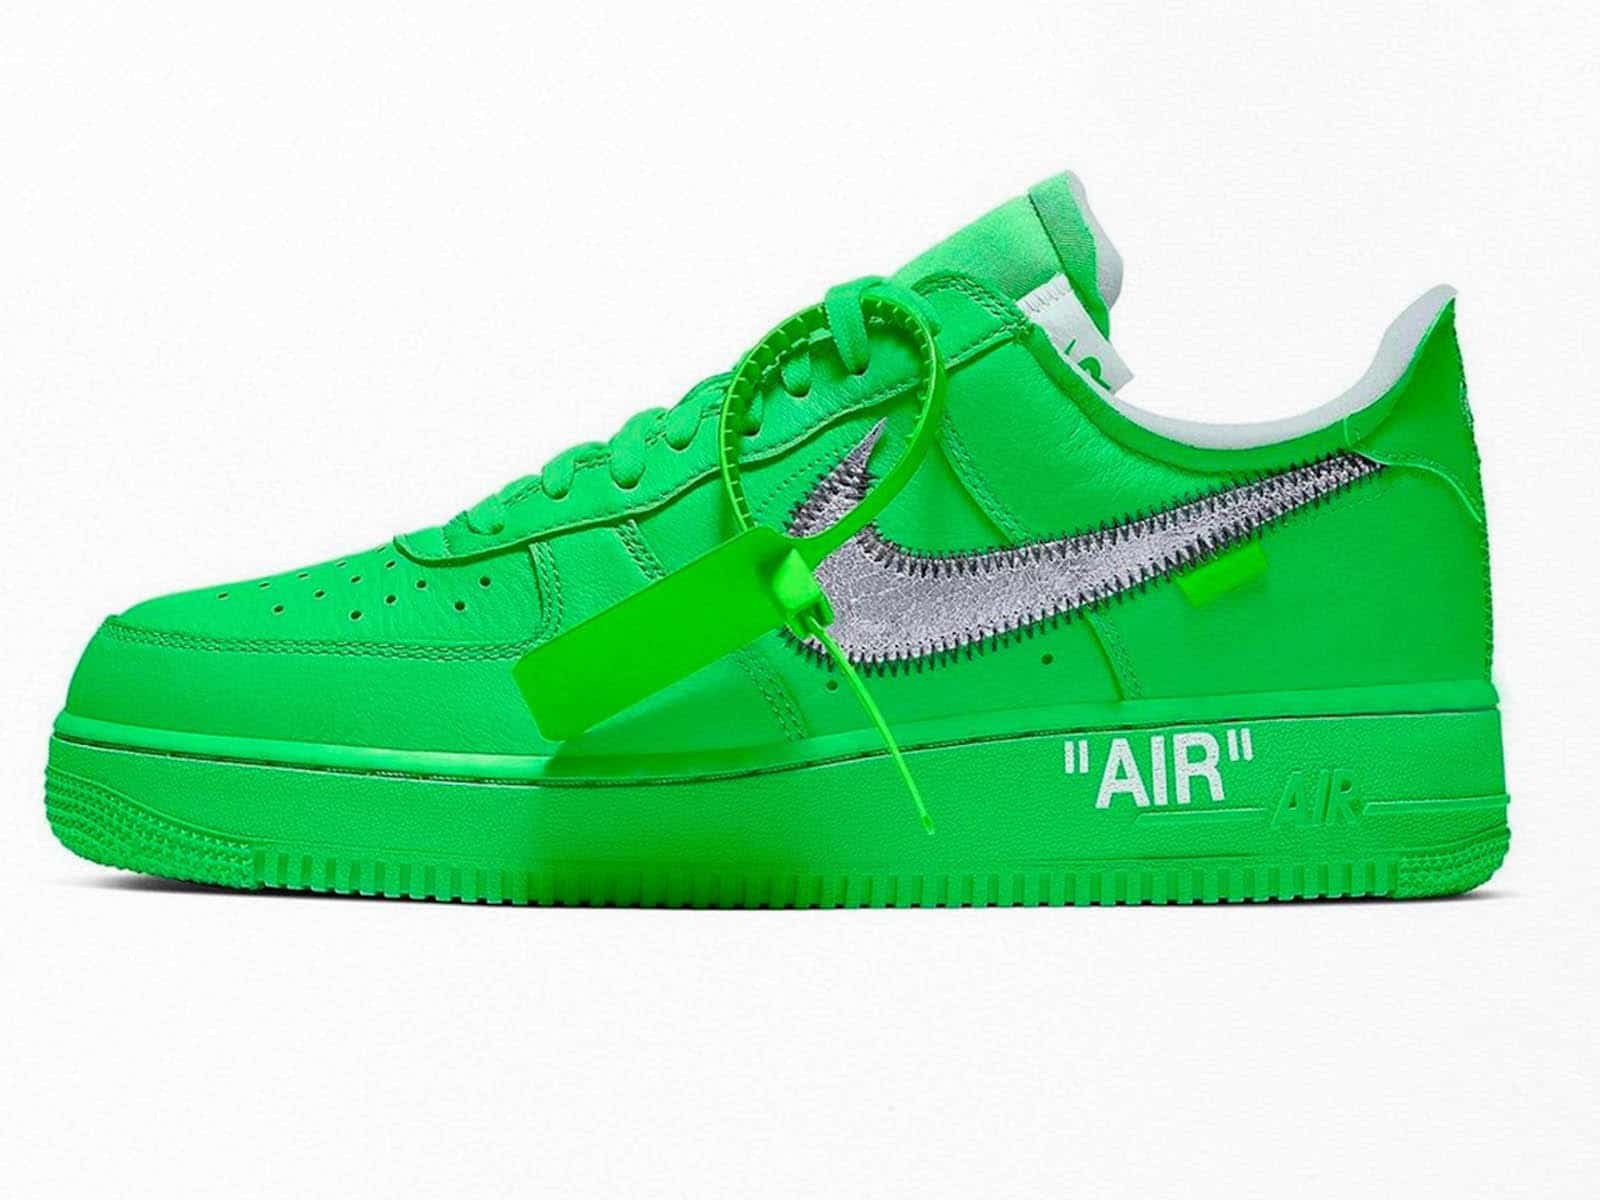 This Summer Off-White x Nike Air Force 1 Low “Green”